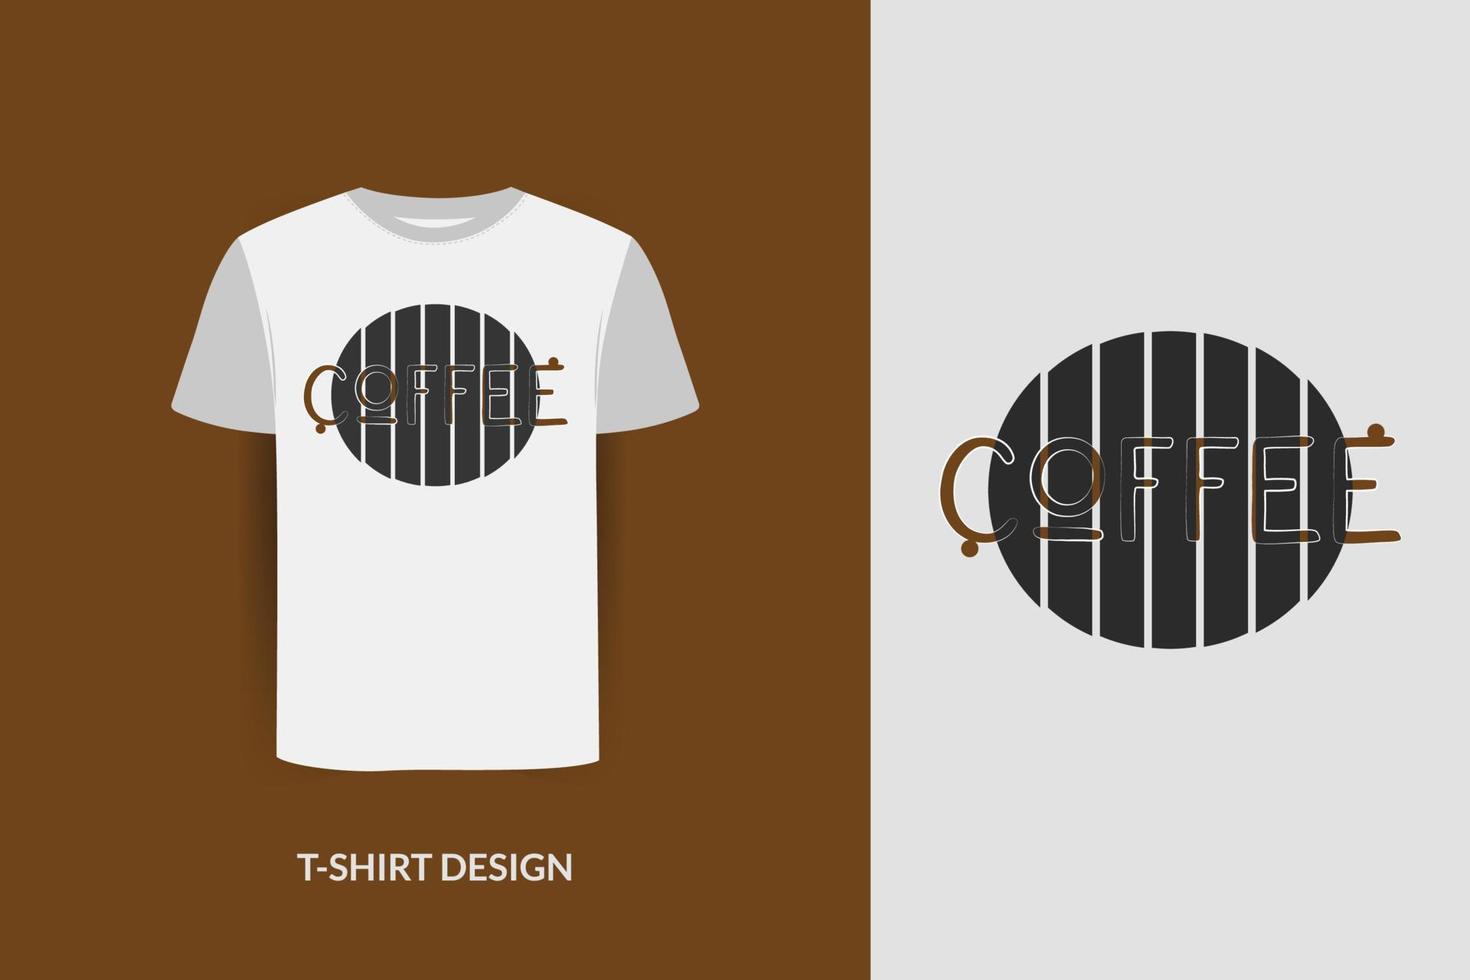 t-shirt design. T shirt print design, T-shirt design with typography,  typography, print, vector